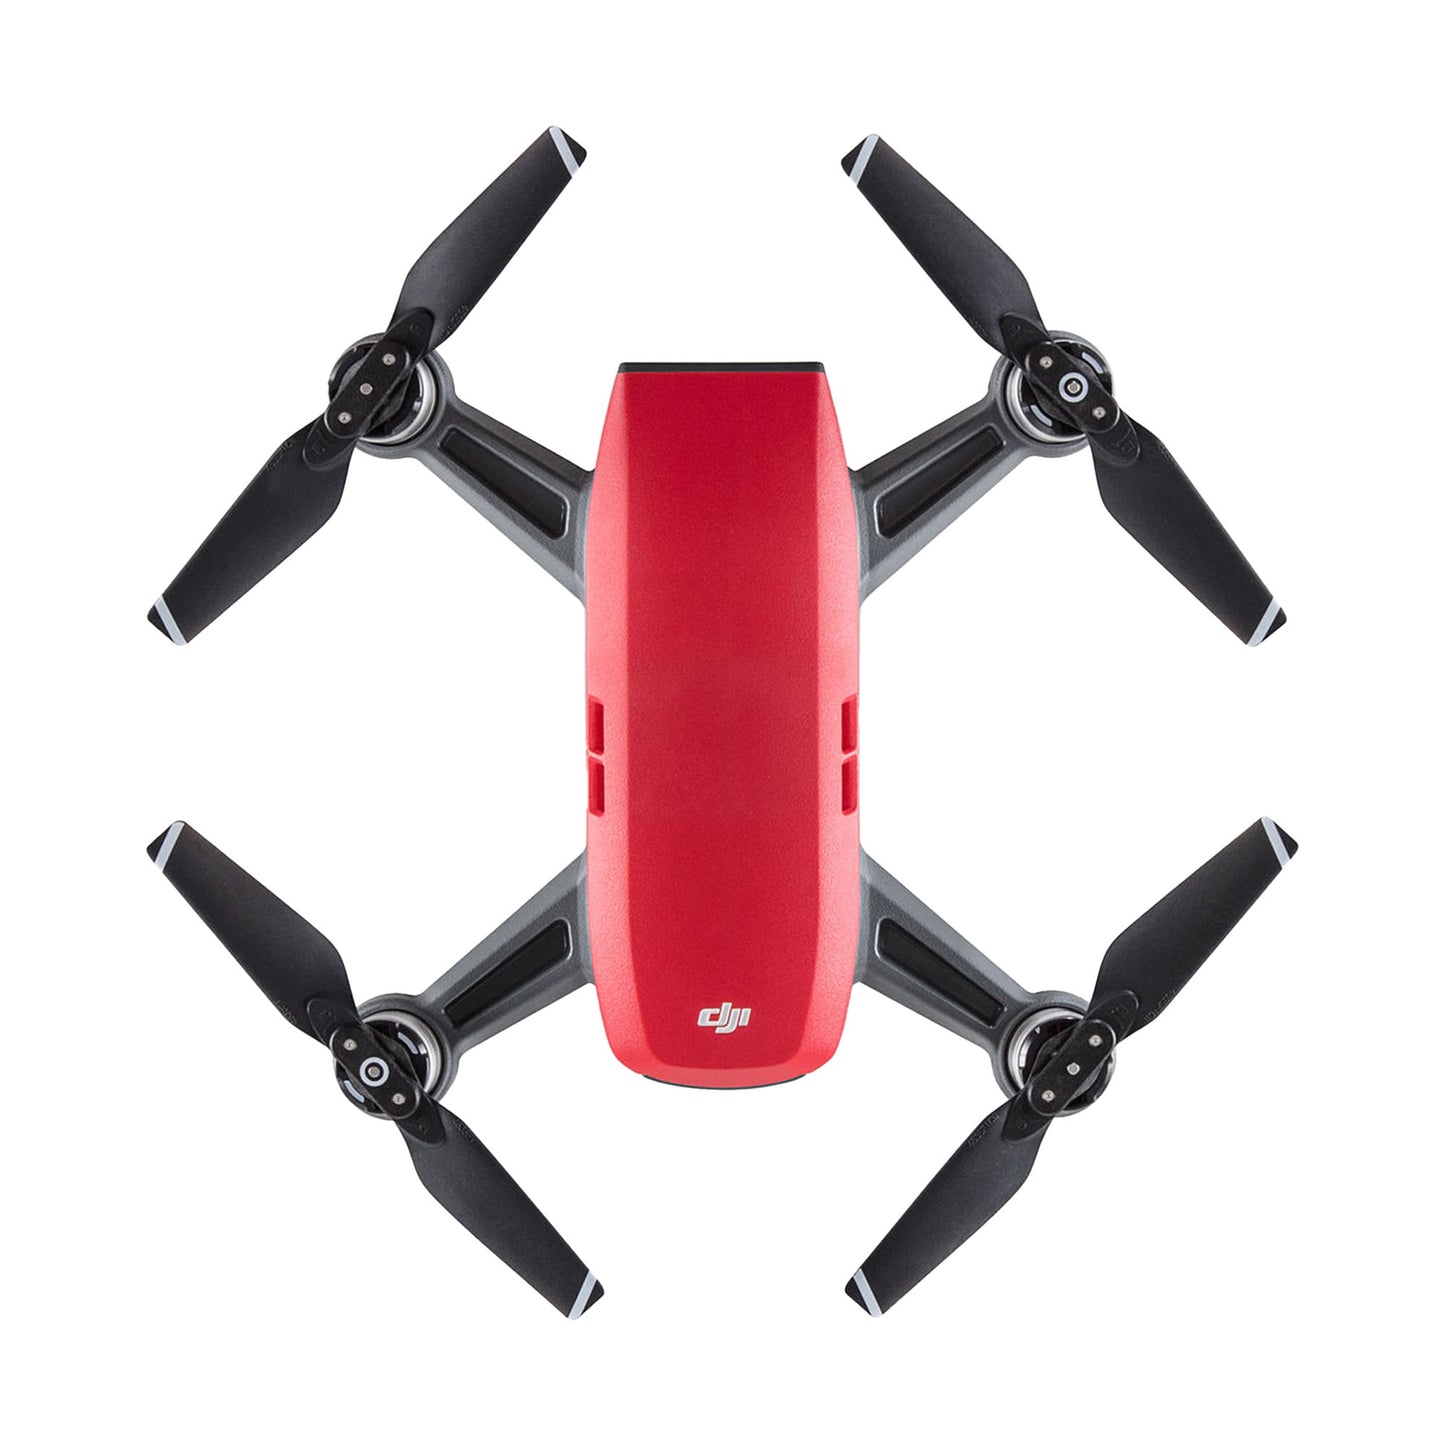 DJI Spark Fly More Combo - Lava Red